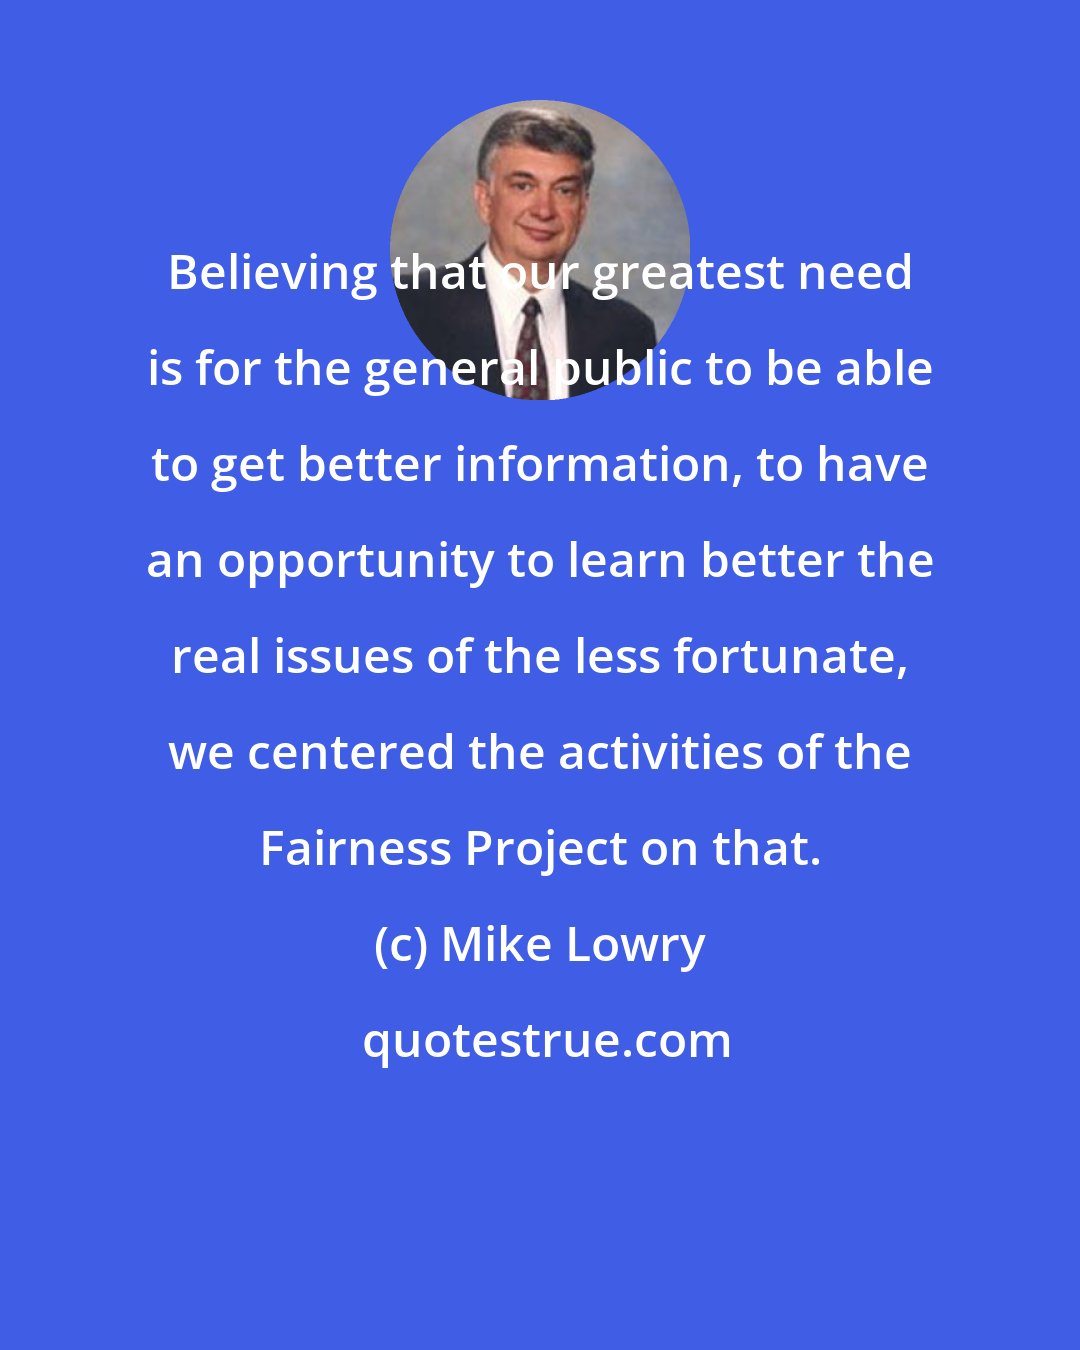 Mike Lowry: Believing that our greatest need is for the general public to be able to get better information, to have an opportunity to learn better the real issues of the less fortunate, we centered the activities of the Fairness Project on that.